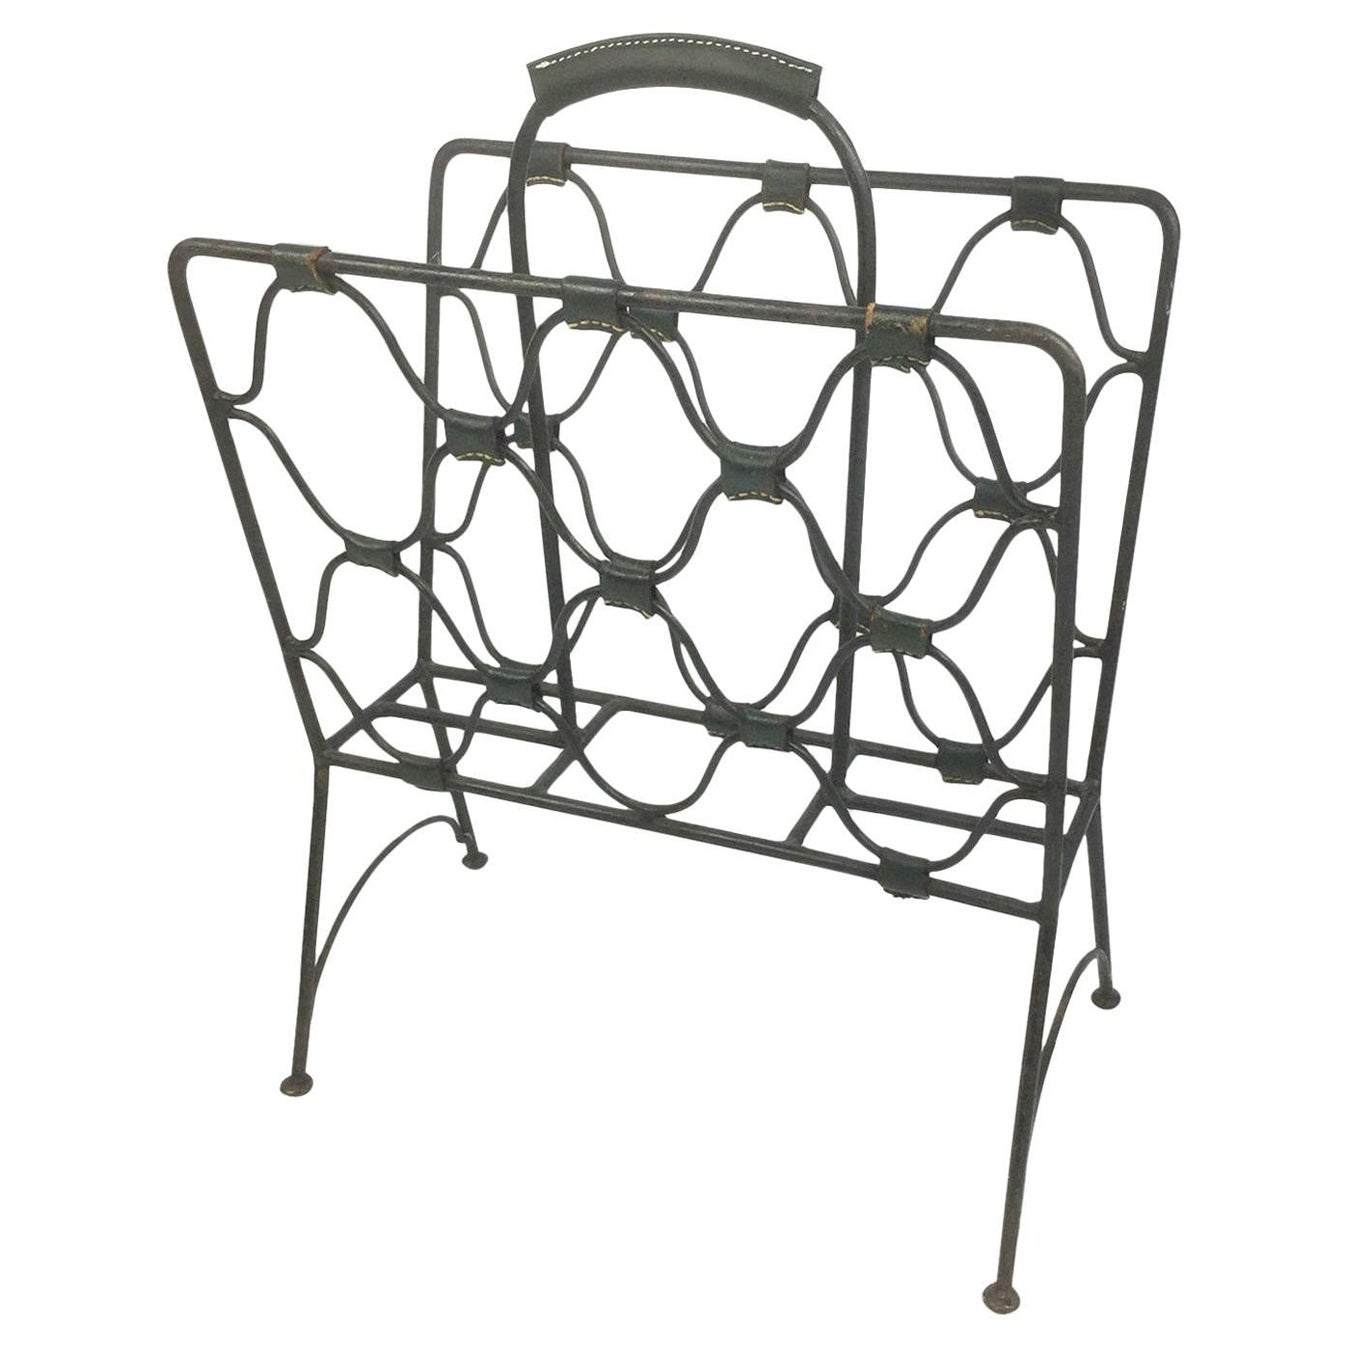 Jacques Adnet Magazine Rack in Wrought Iron and Green Leather from the 1940s For Sale